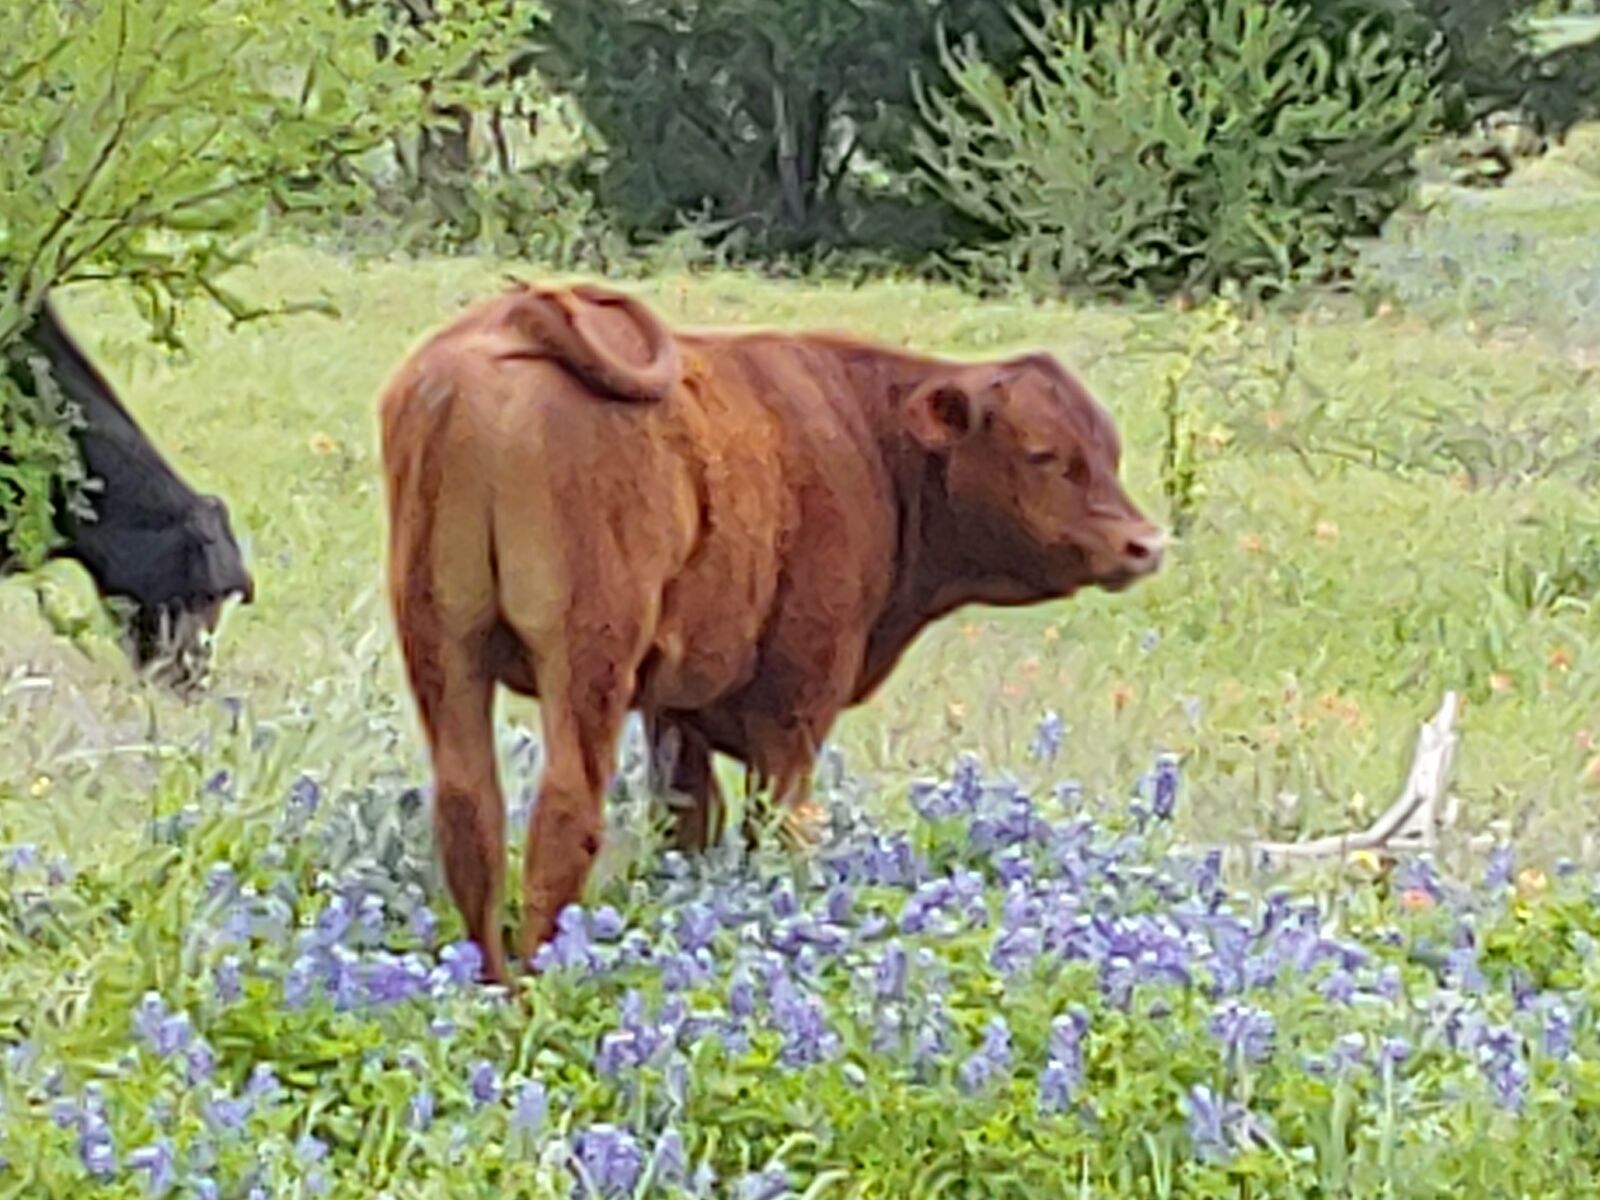 LG G7 THINQ sample photo. Cow, bluebonnets, nature photography